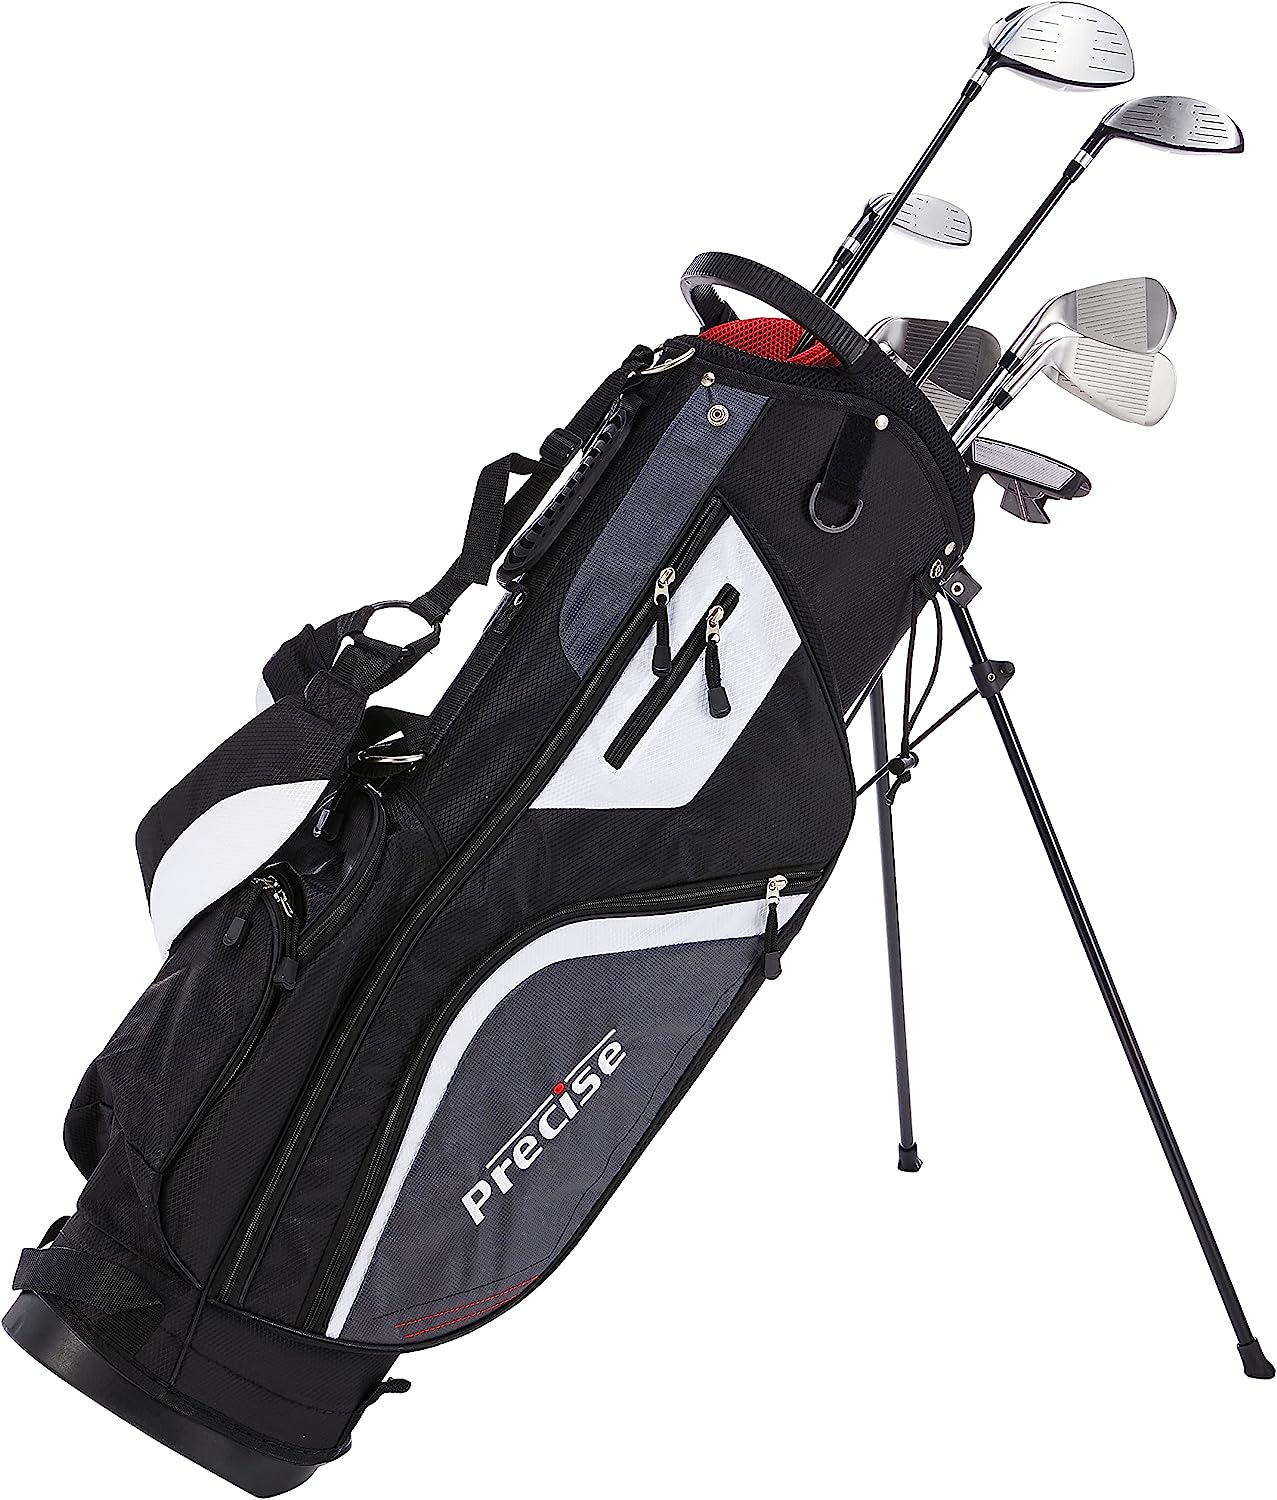 Precise M5 Men’s Complete Golf Clubs Package Set Review